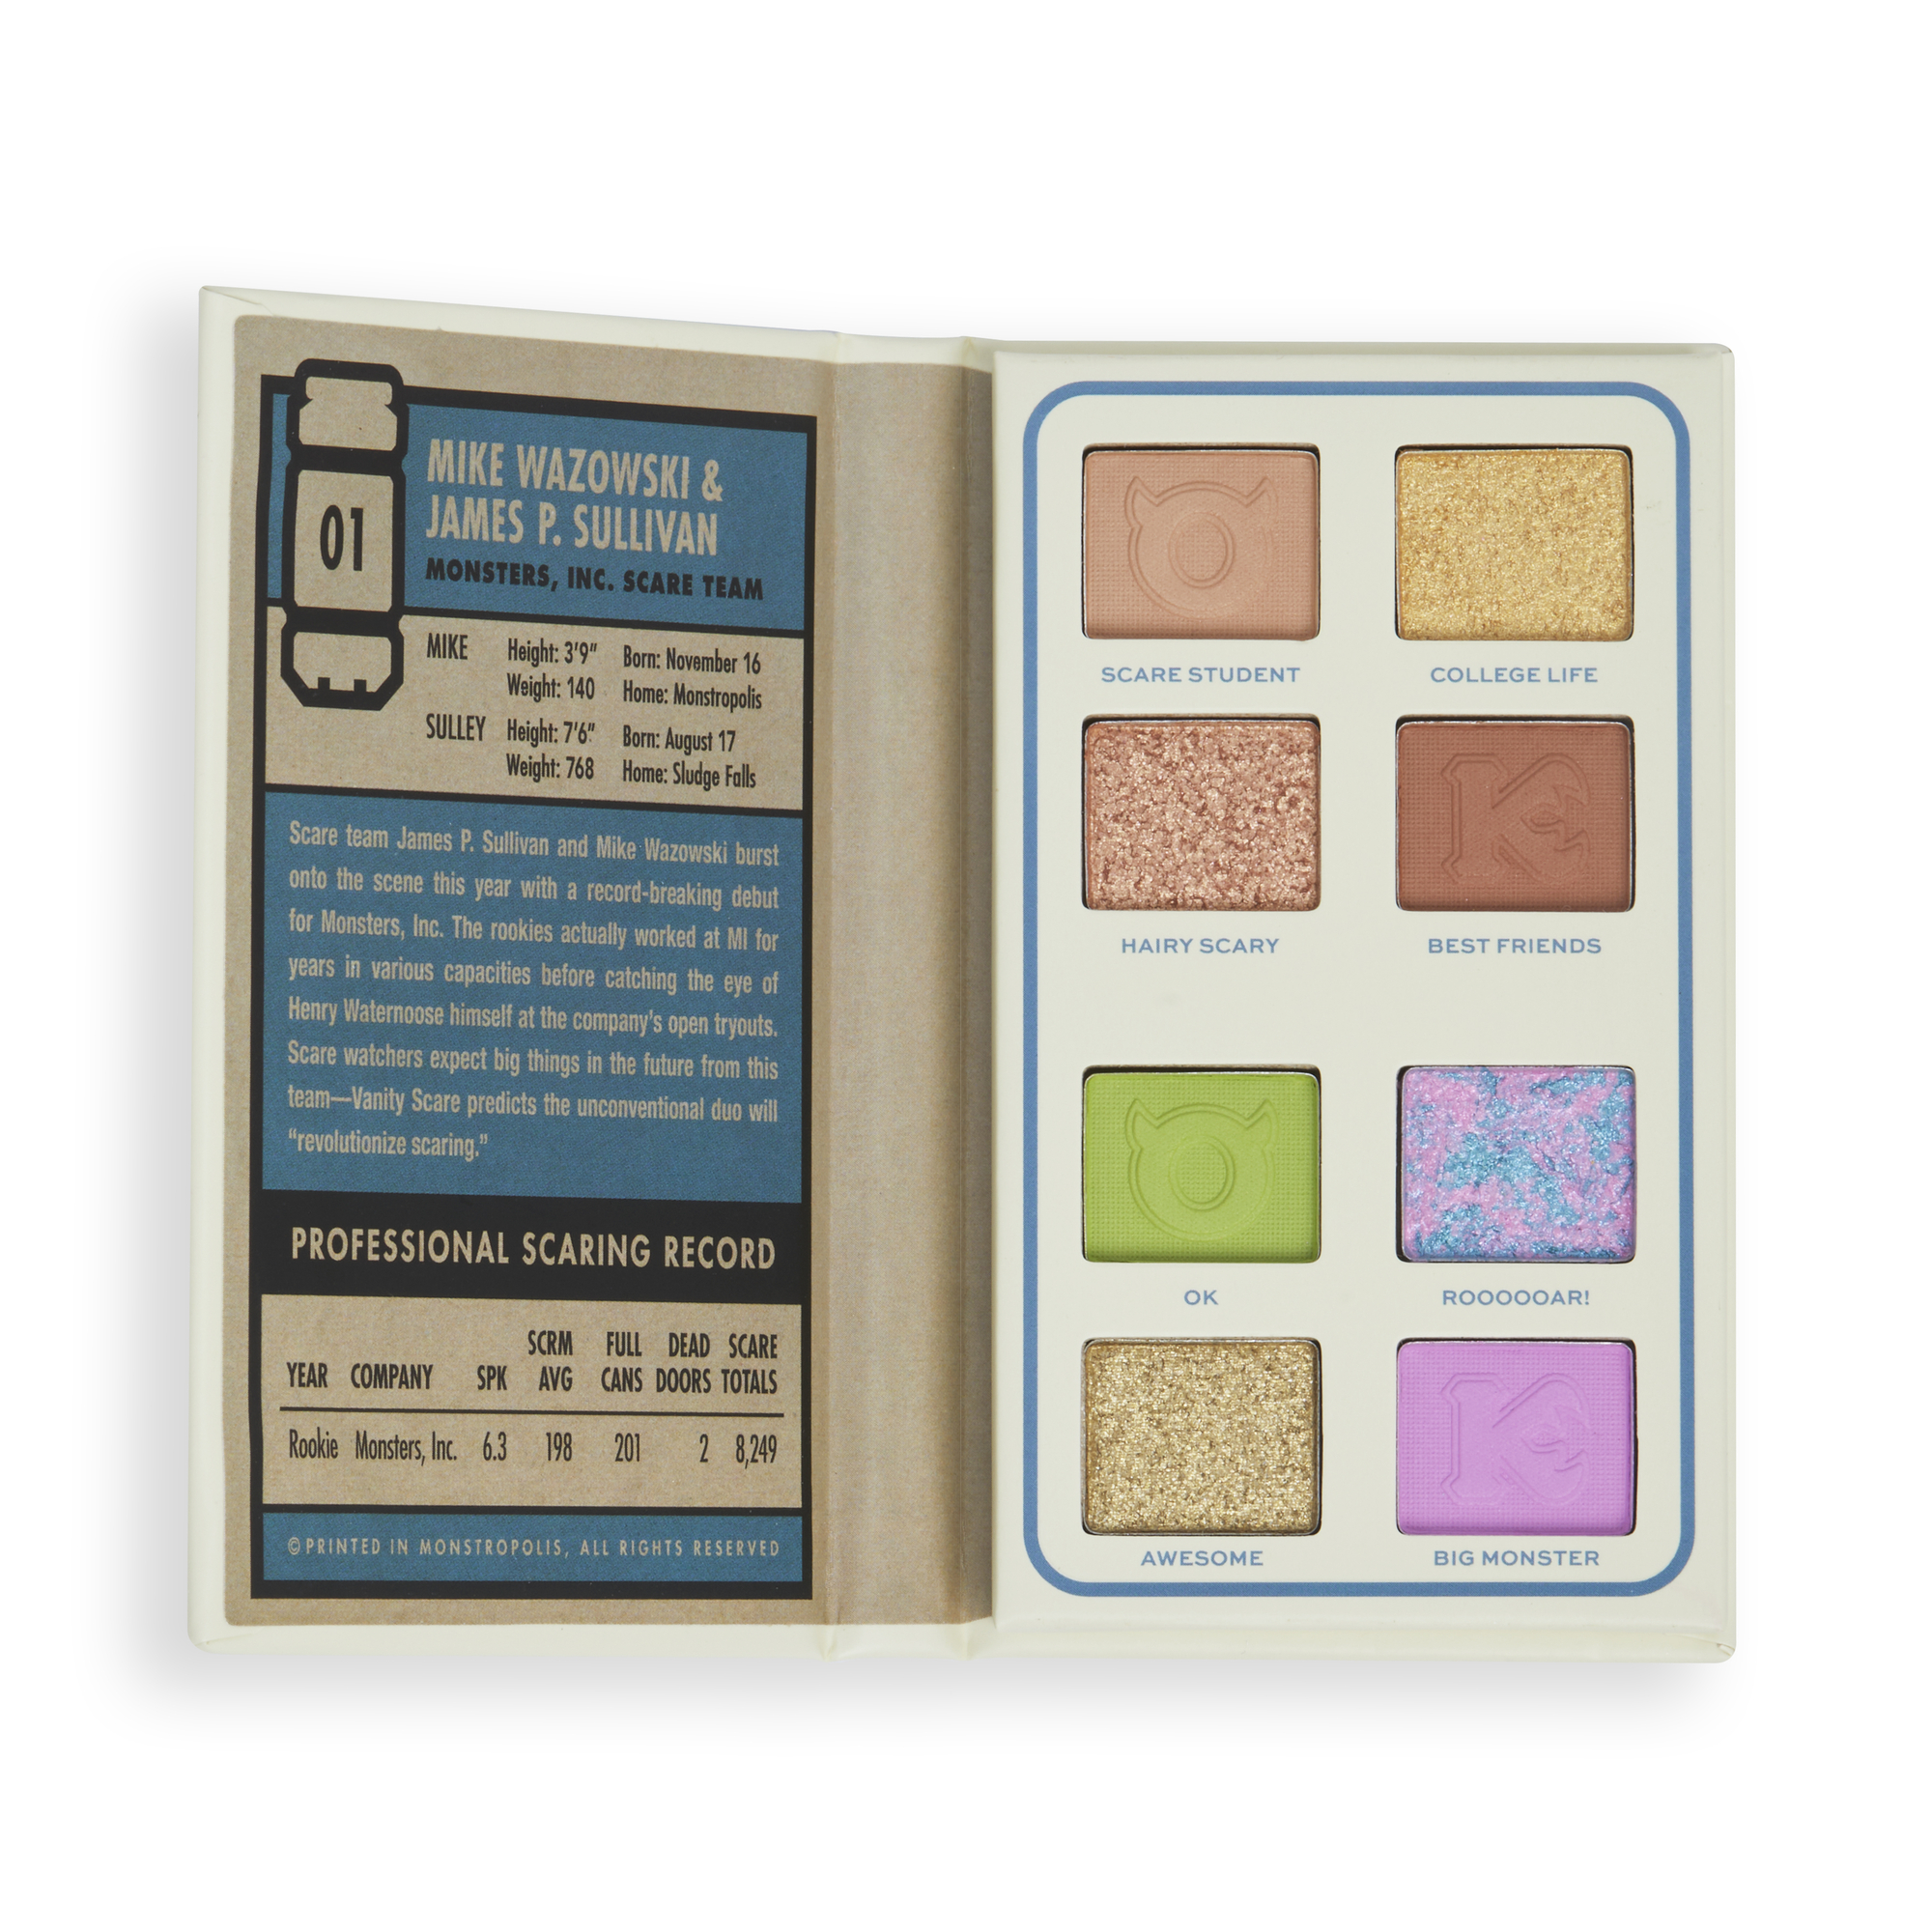 Disney Pixar’s Monsters University and Revolution Mike & Sulley-inspired Scare Card Eyeshadow Palette